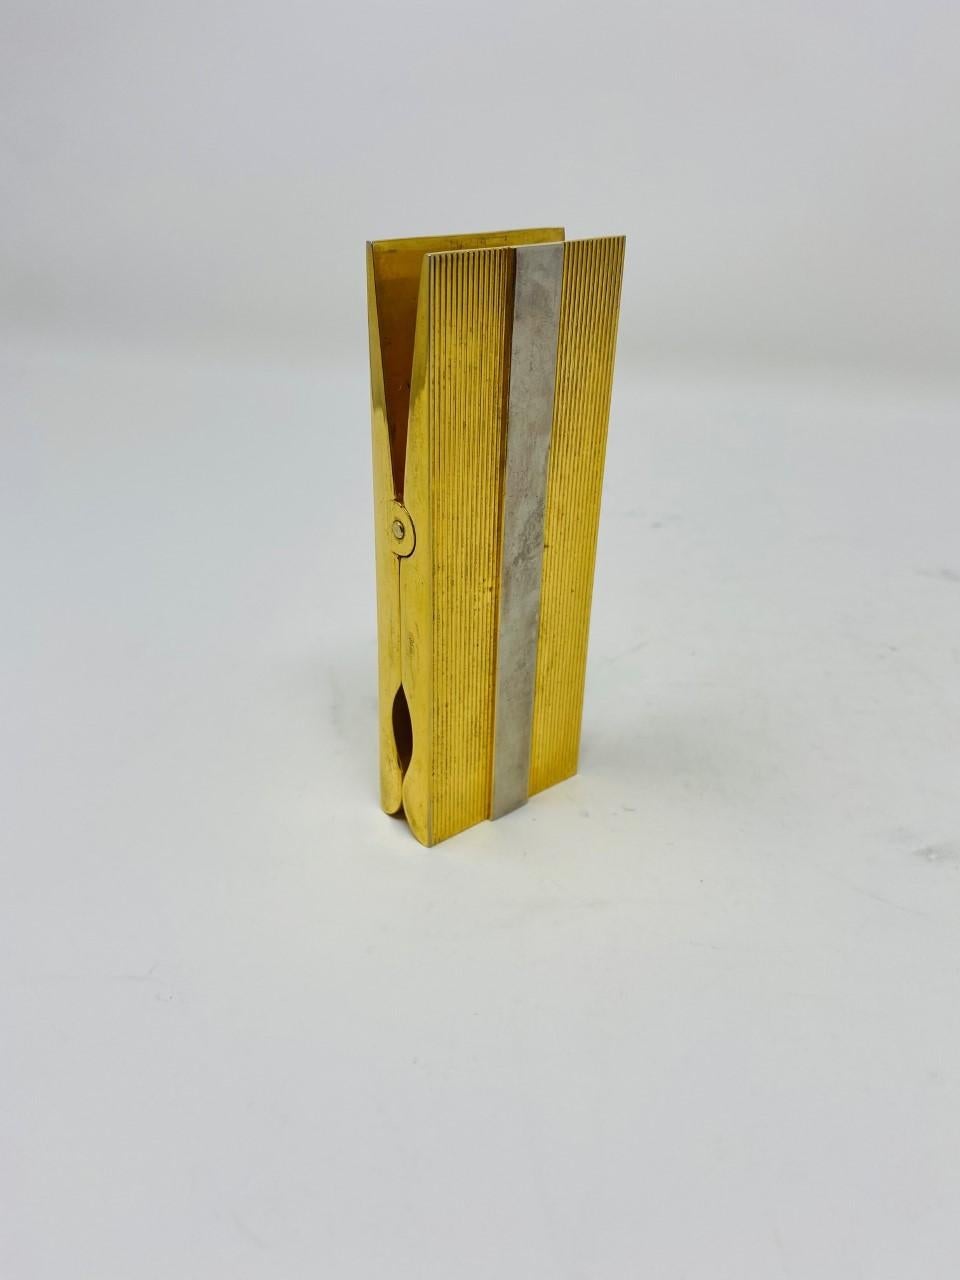 Modernist Mid-Century Brass Clothespin Paperweight For Sale 1